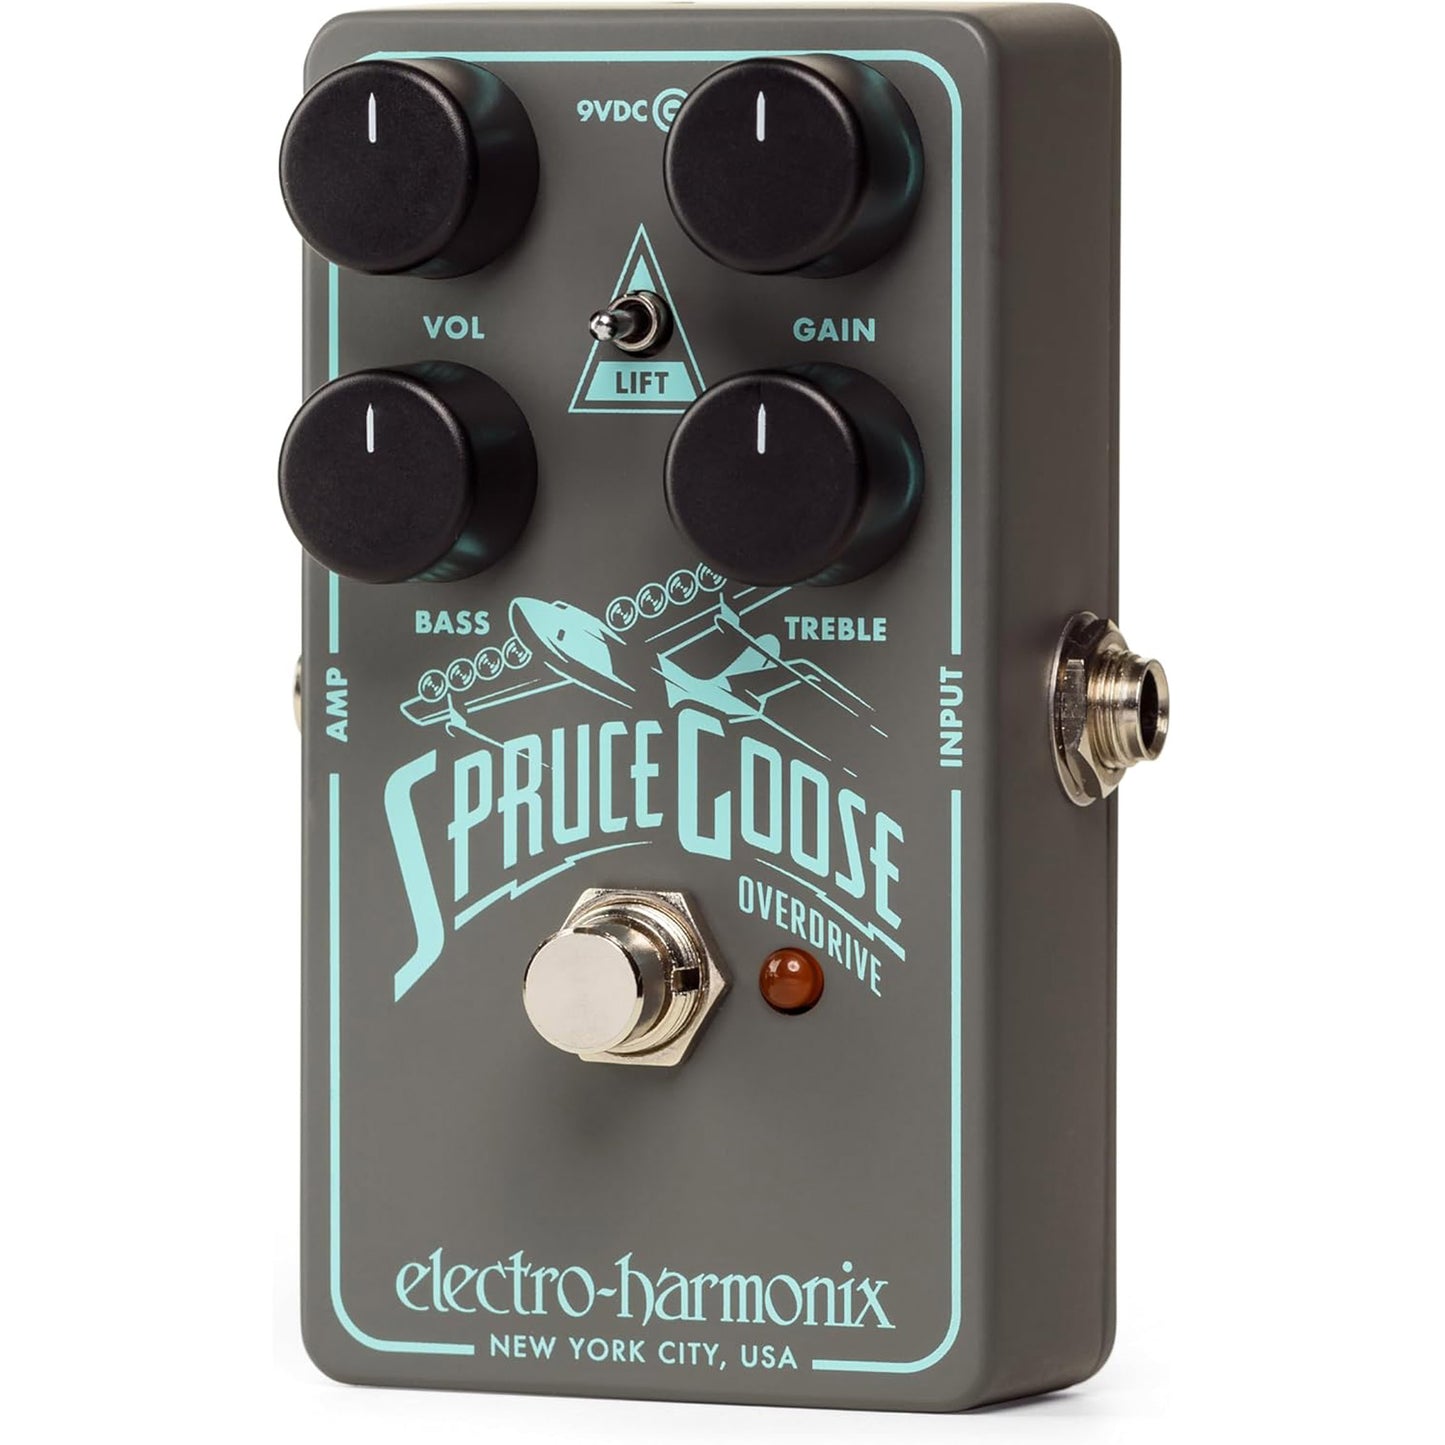 Electro Harmonix Spruce Goose Overdrive Effects Pedal